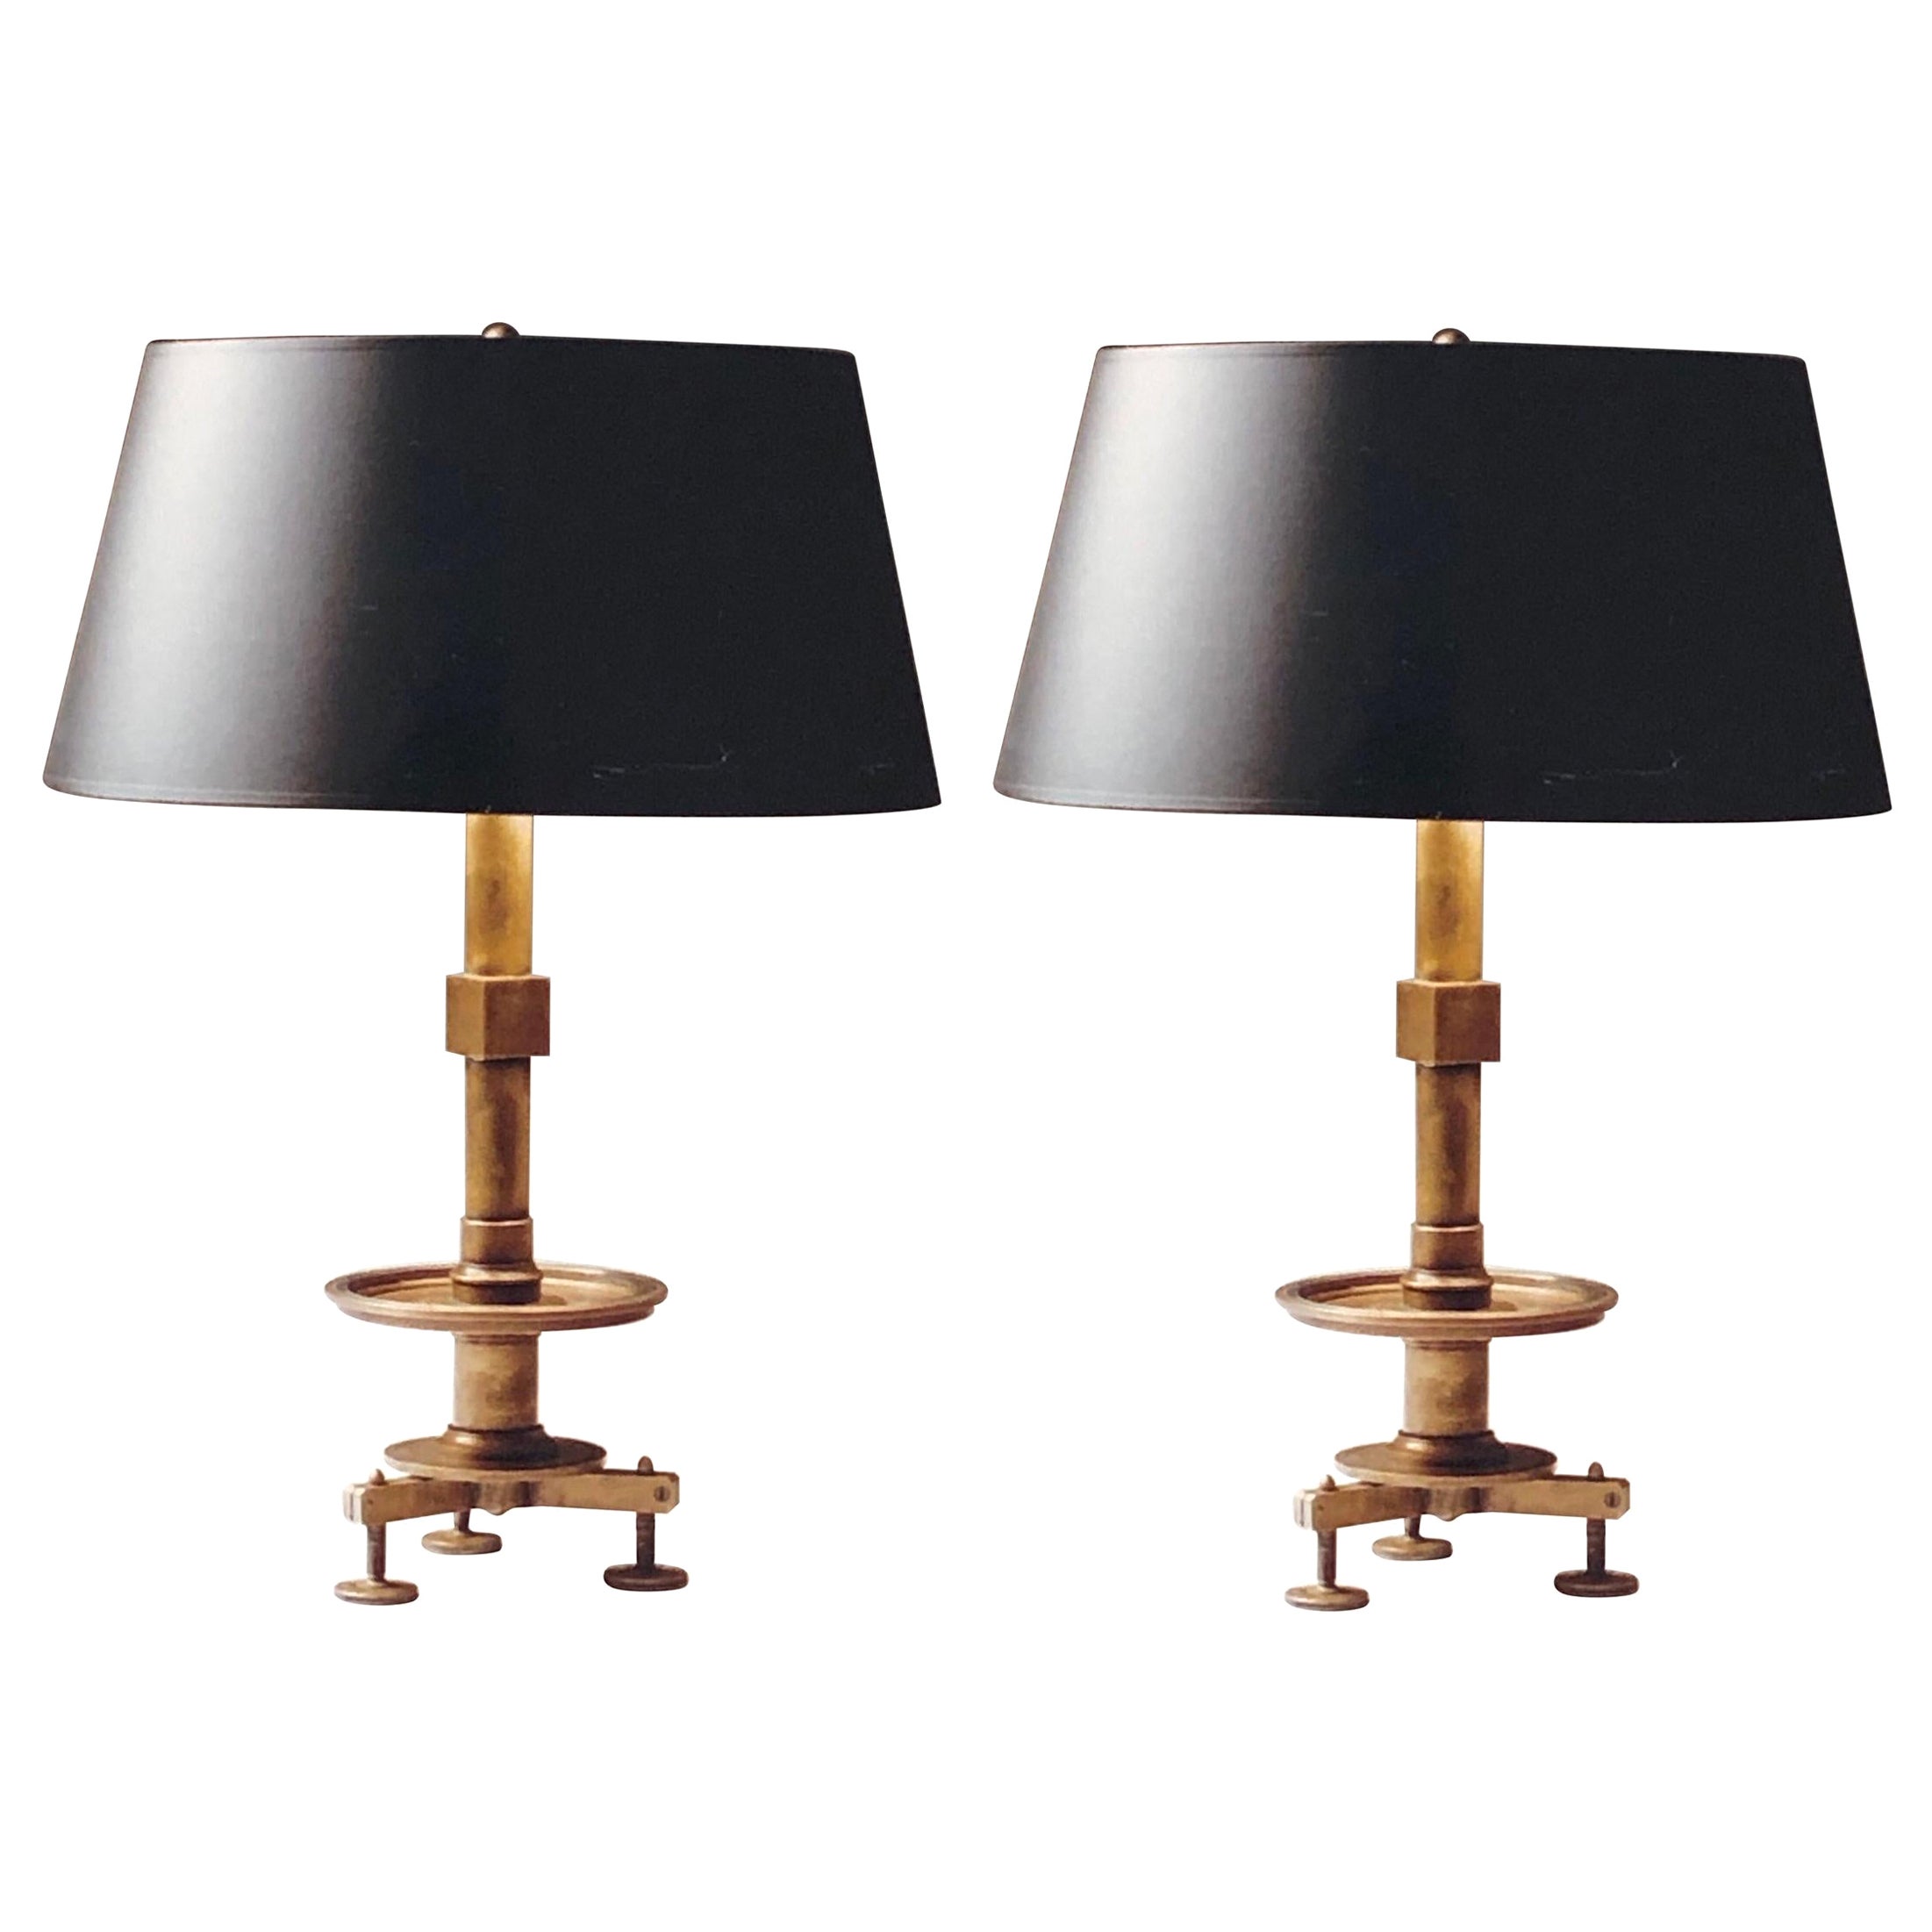 Pair of French Modern Neoclassical Brass and Steel Industrial Style Table Lamps